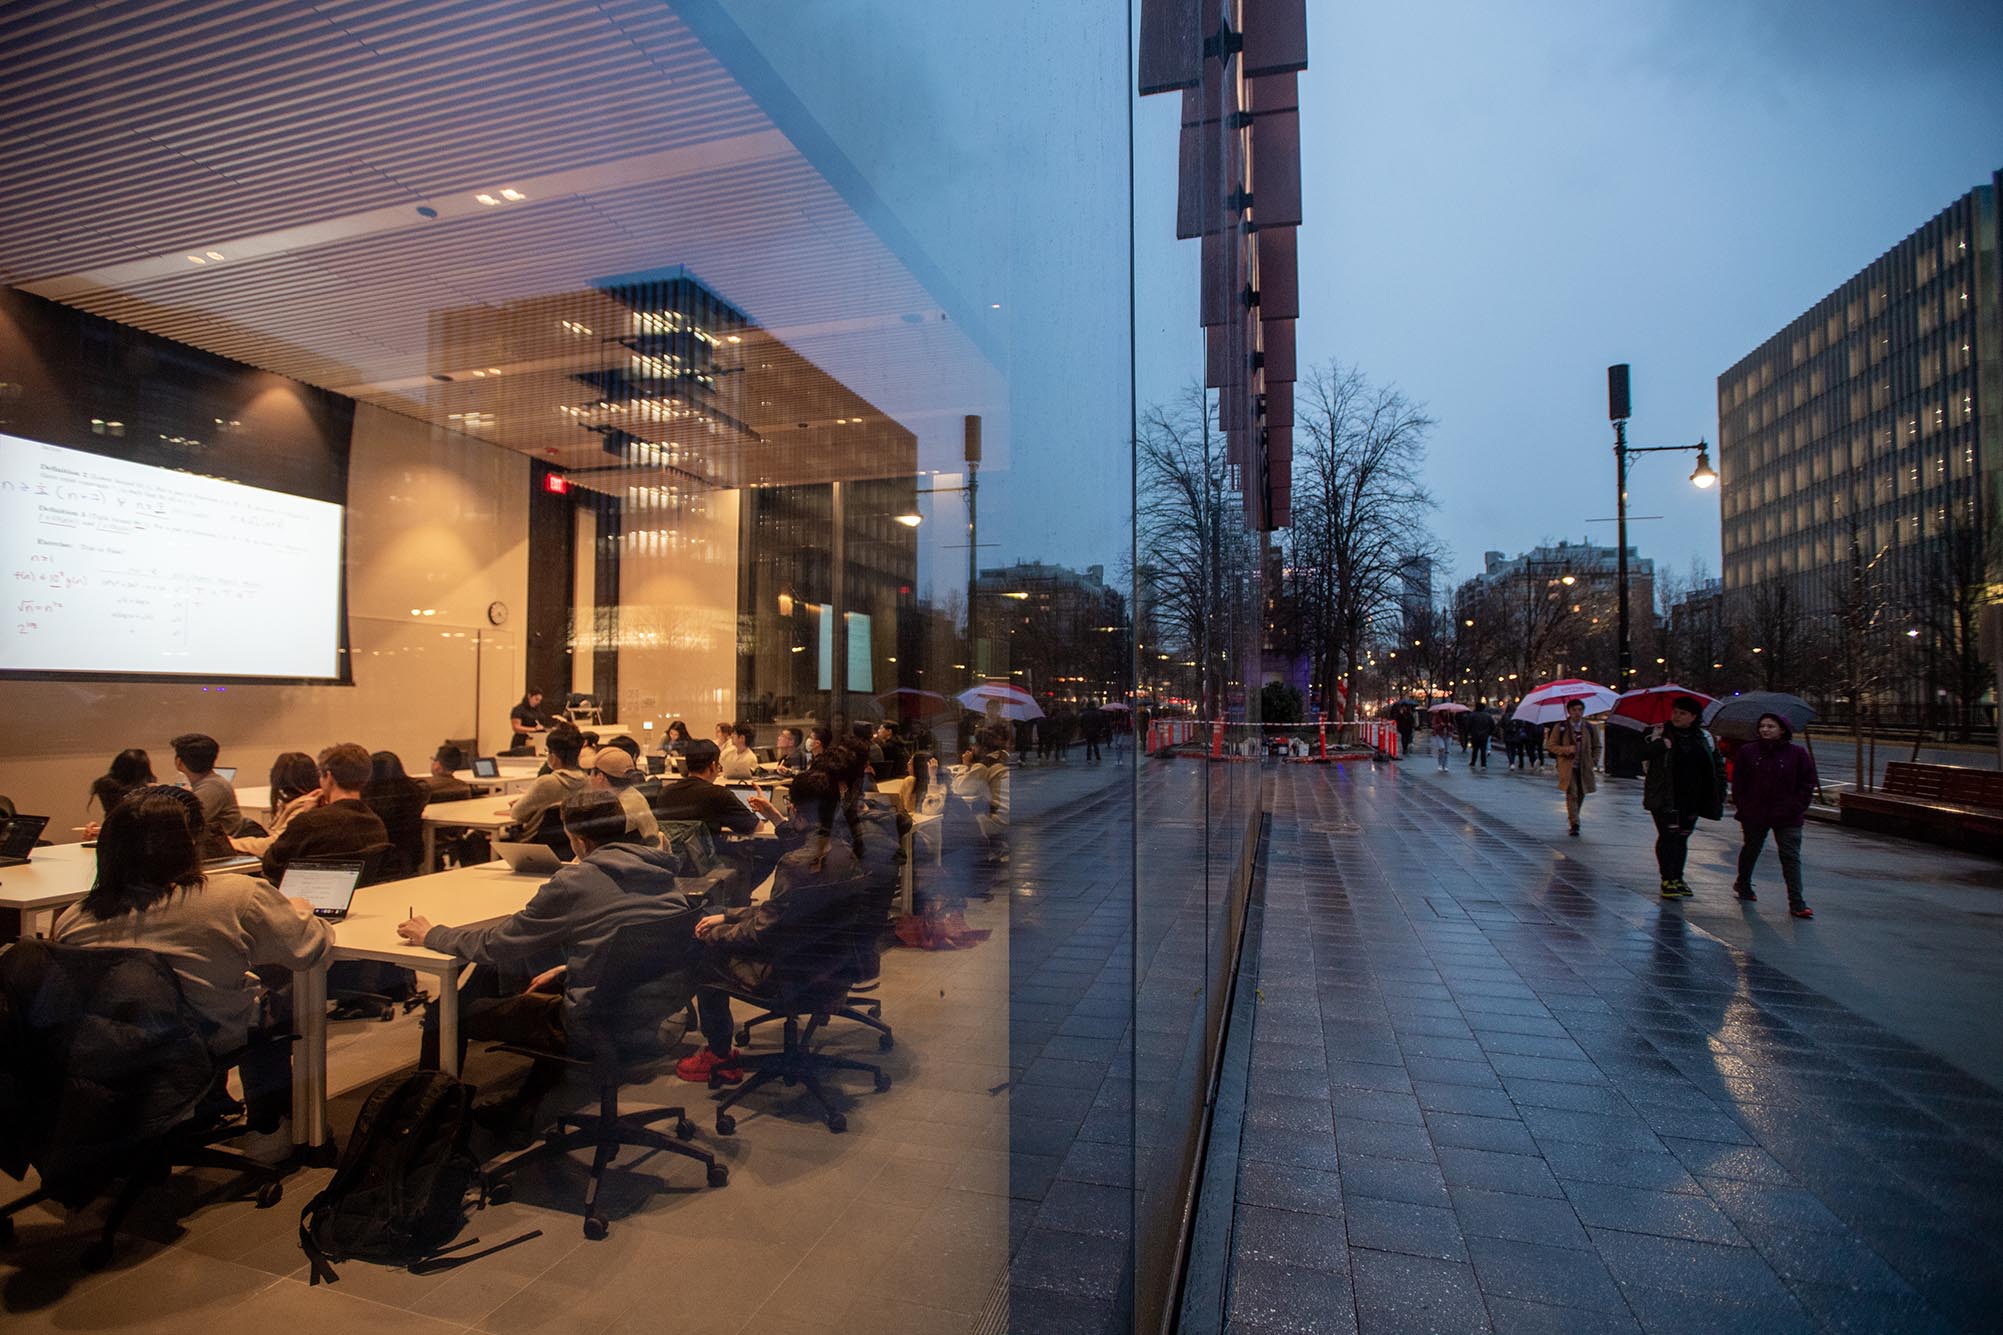 Photo: A side shot of the Center for Computing and Data Science building. On the left you can see a class of students in the midst of a lecture through the glass wall. On the right you see pedestrians walking down the sidewalk with umbrellas during the rainy evening.